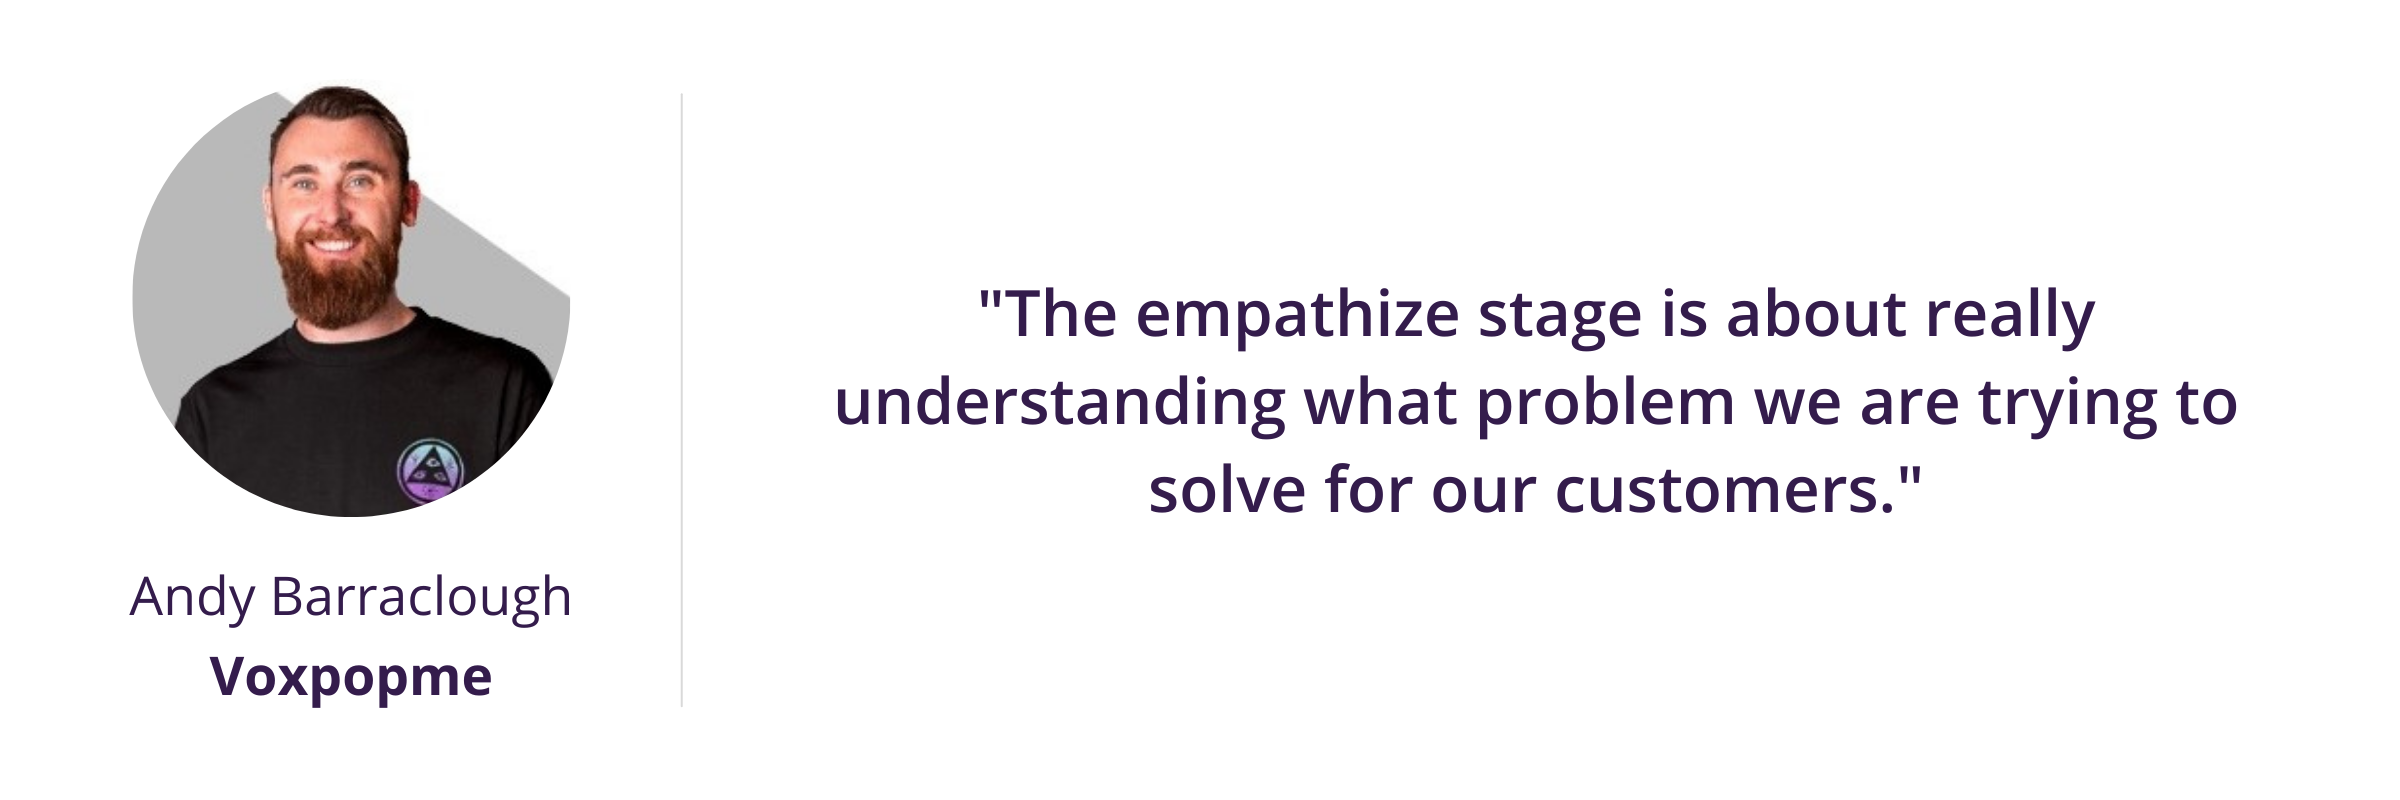 "The empathize stage is about really understanding what problem we are trying to solve for our customers."